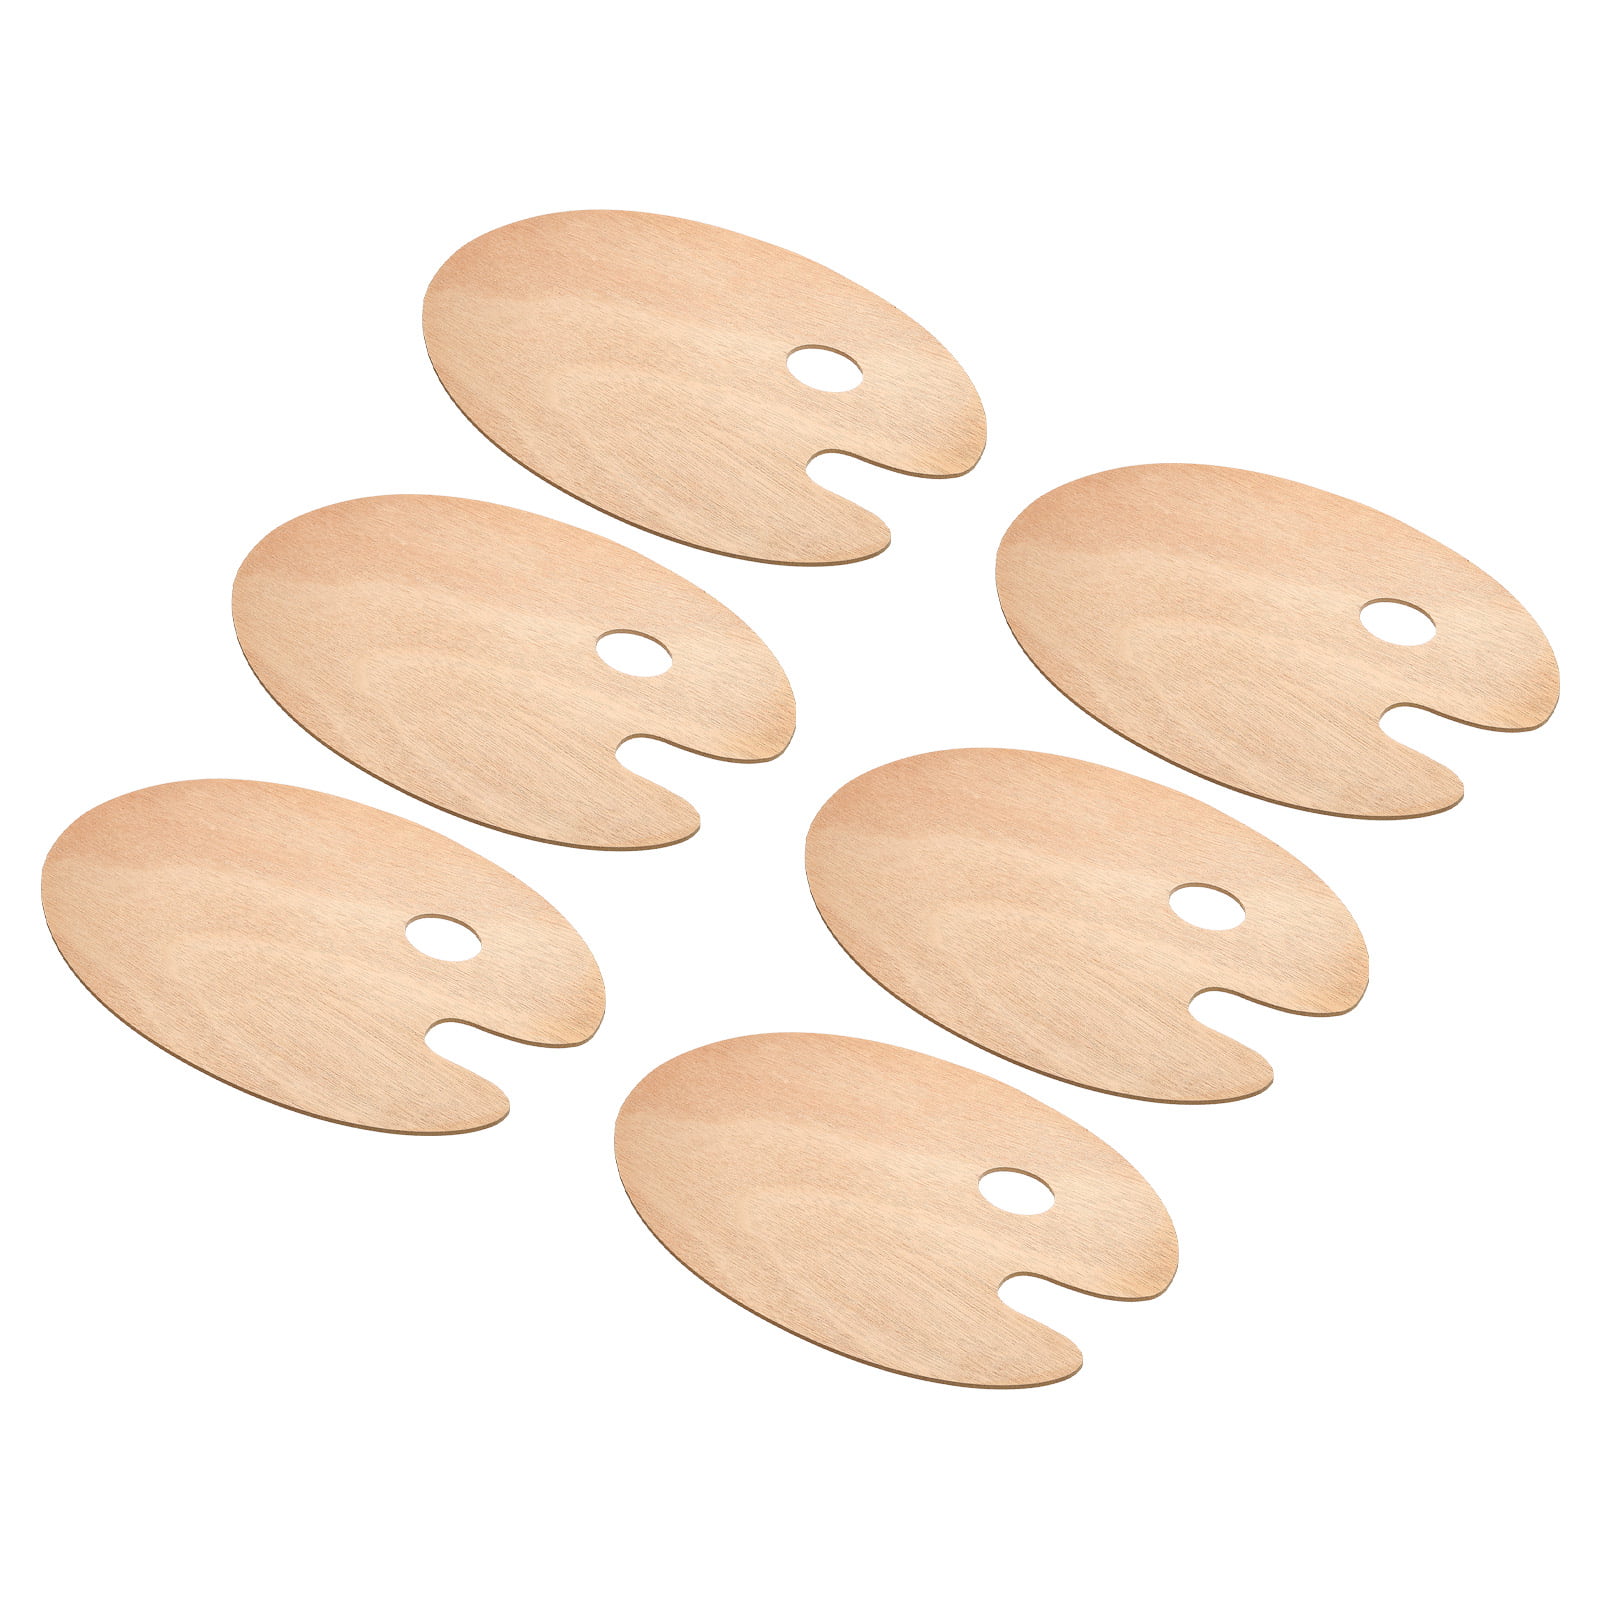 Bright Creations 12 Pack Unfinished Wood Oval Painting Palette Pallet Holder Tray for Acrylic Oil Watercolor Crafts Art, 12 x 8 in